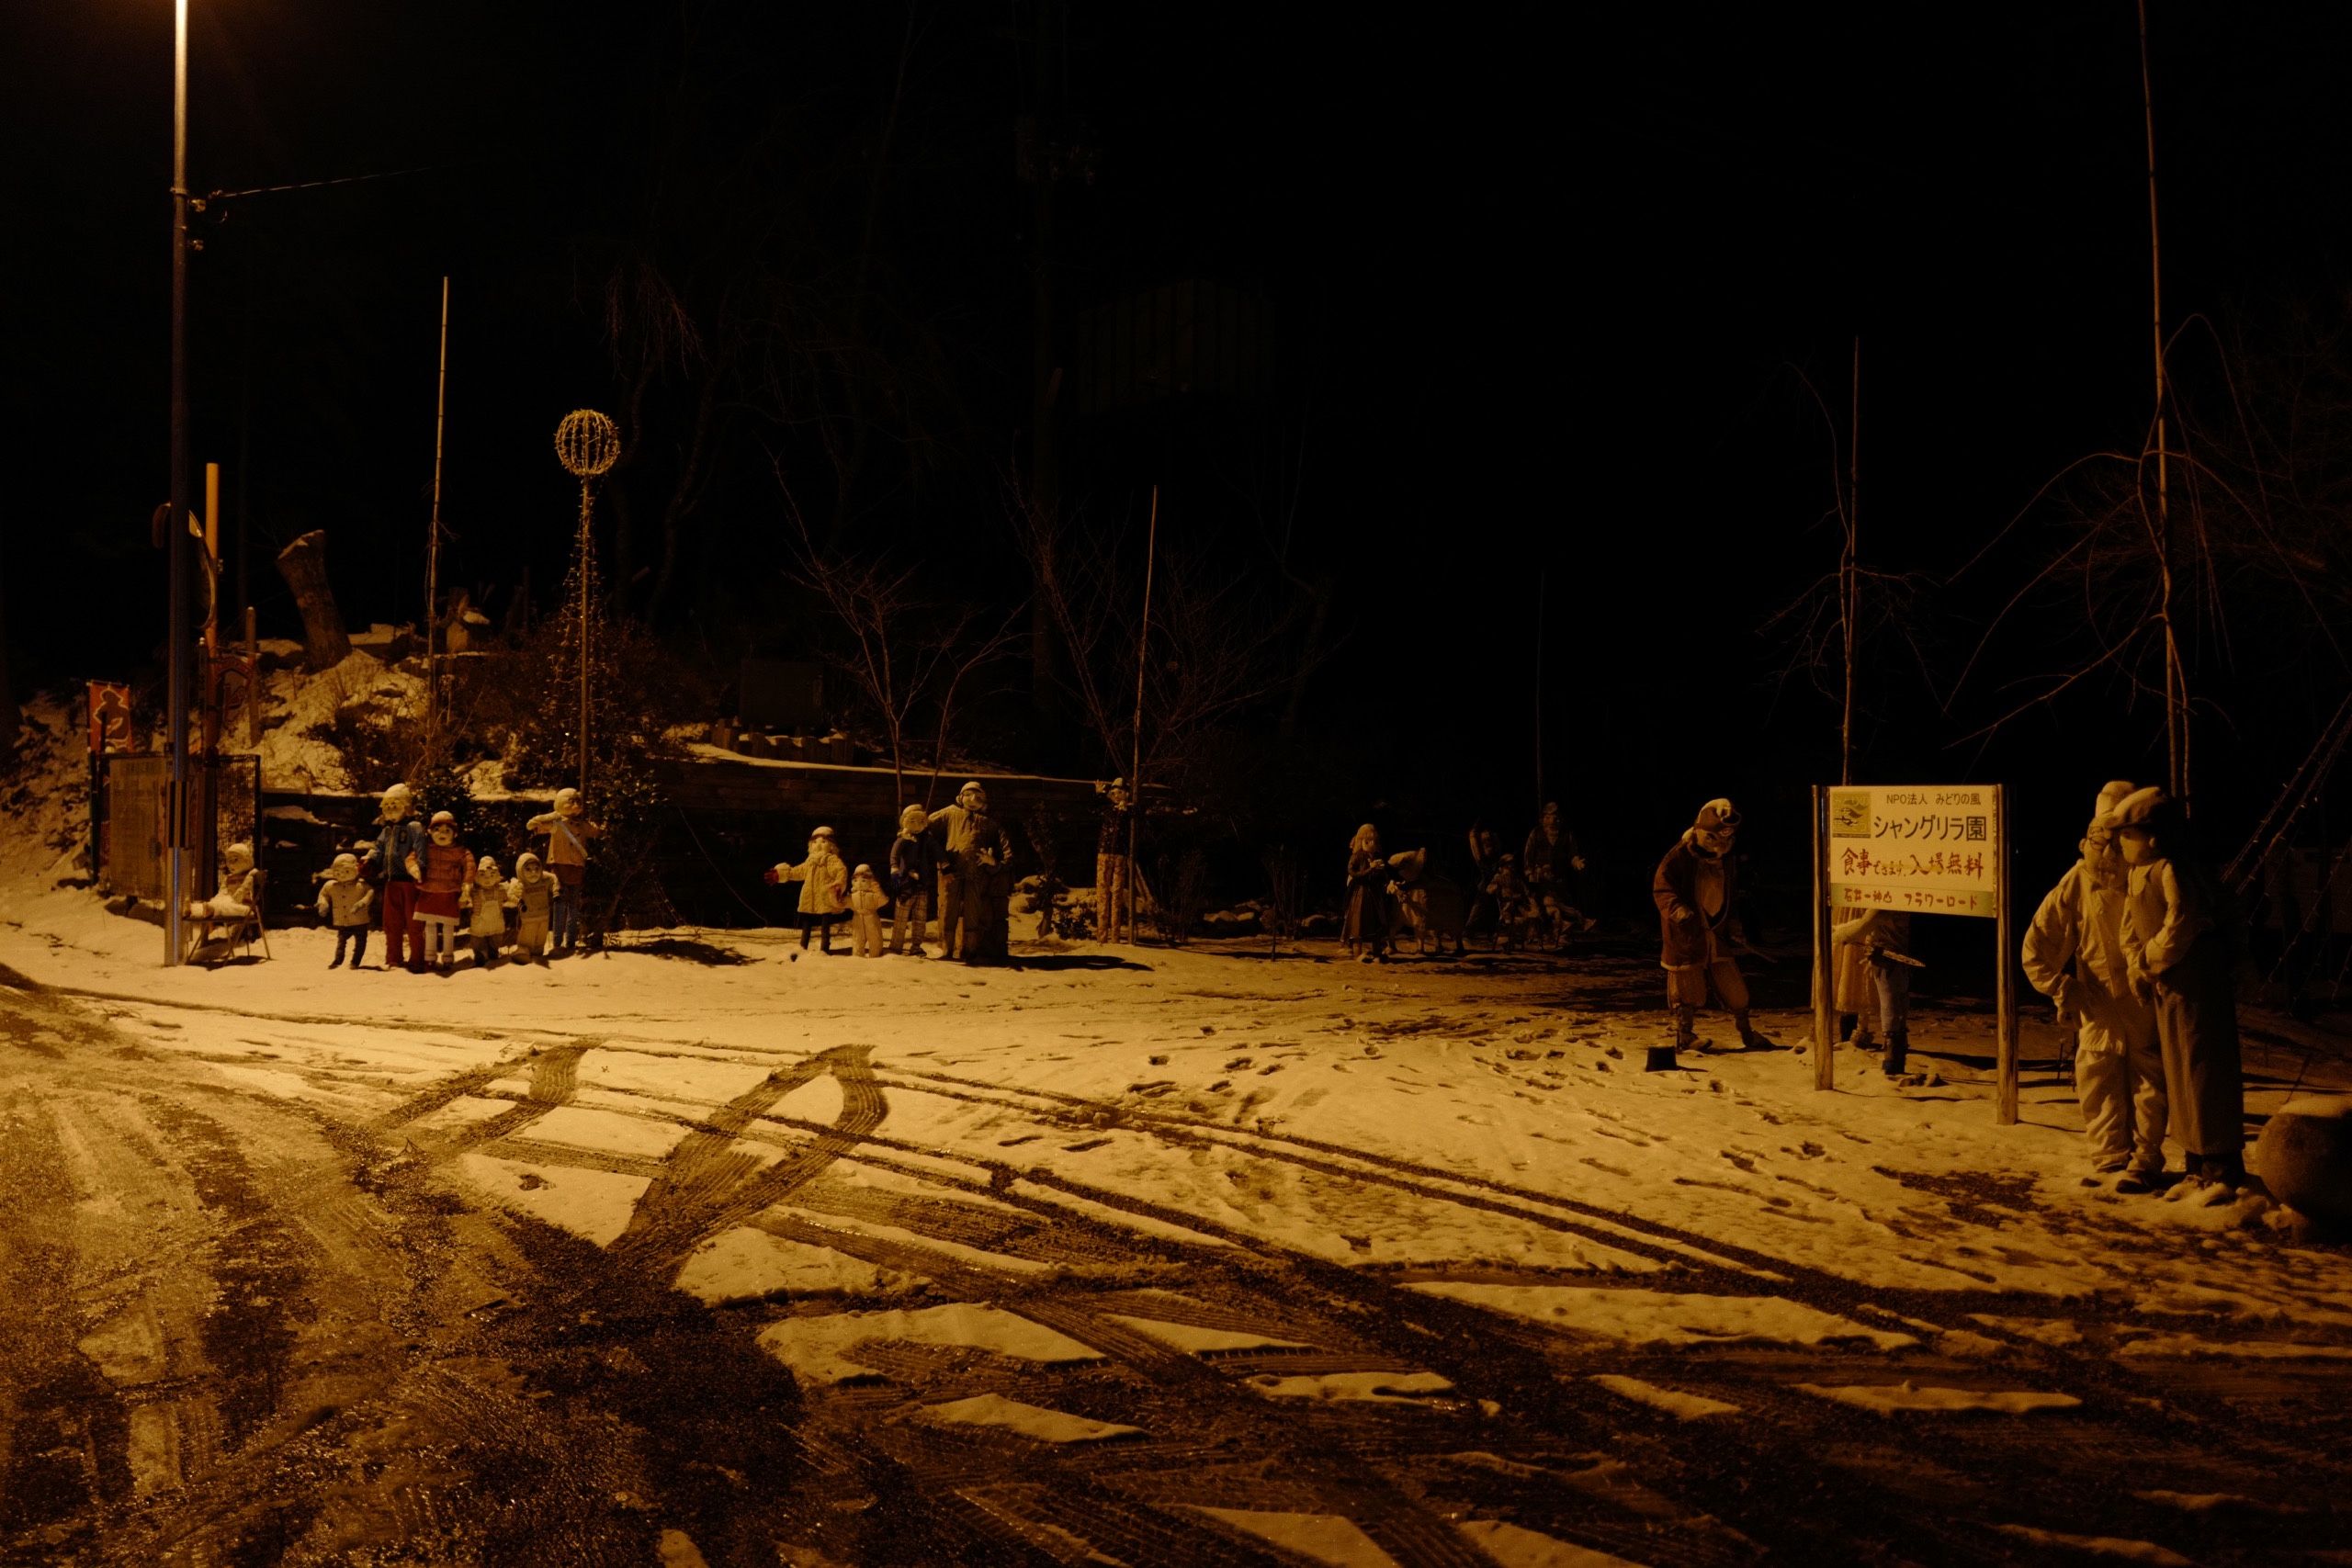 About 20 human-sized dolls lounging at night in a snowed-in area by a narrow road.